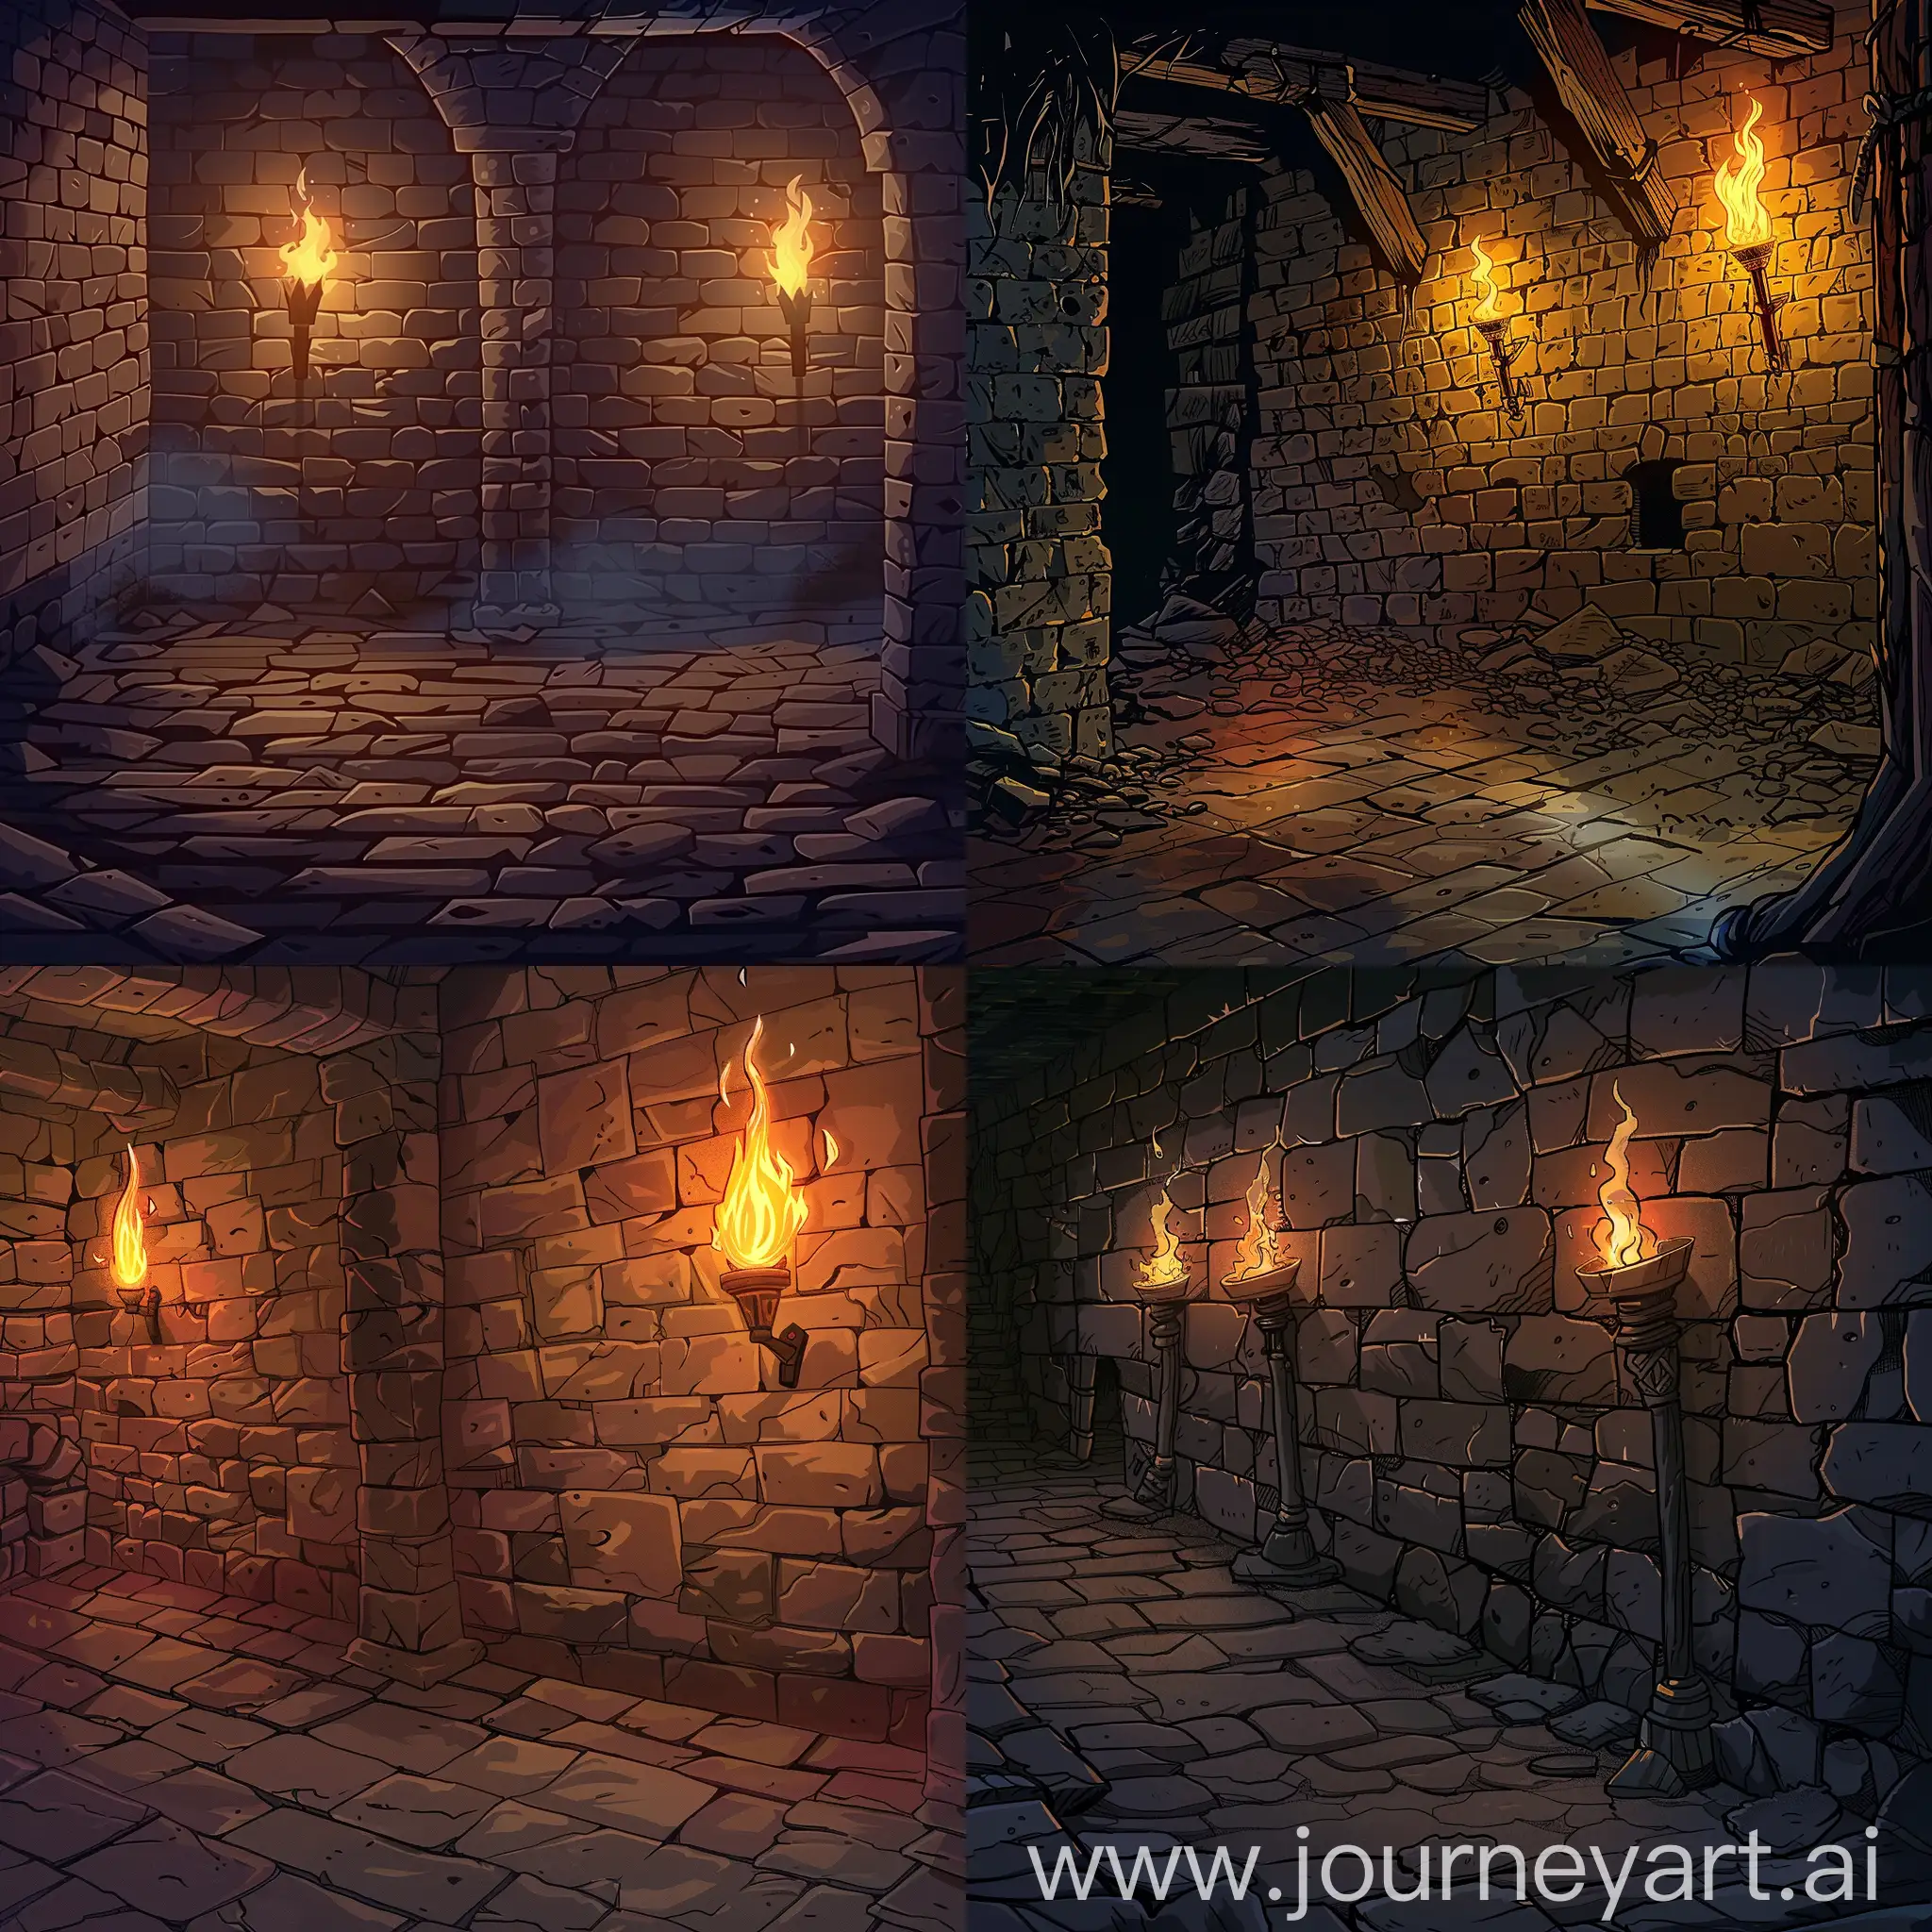 comic style dungeon, brickwork, torches on the walls